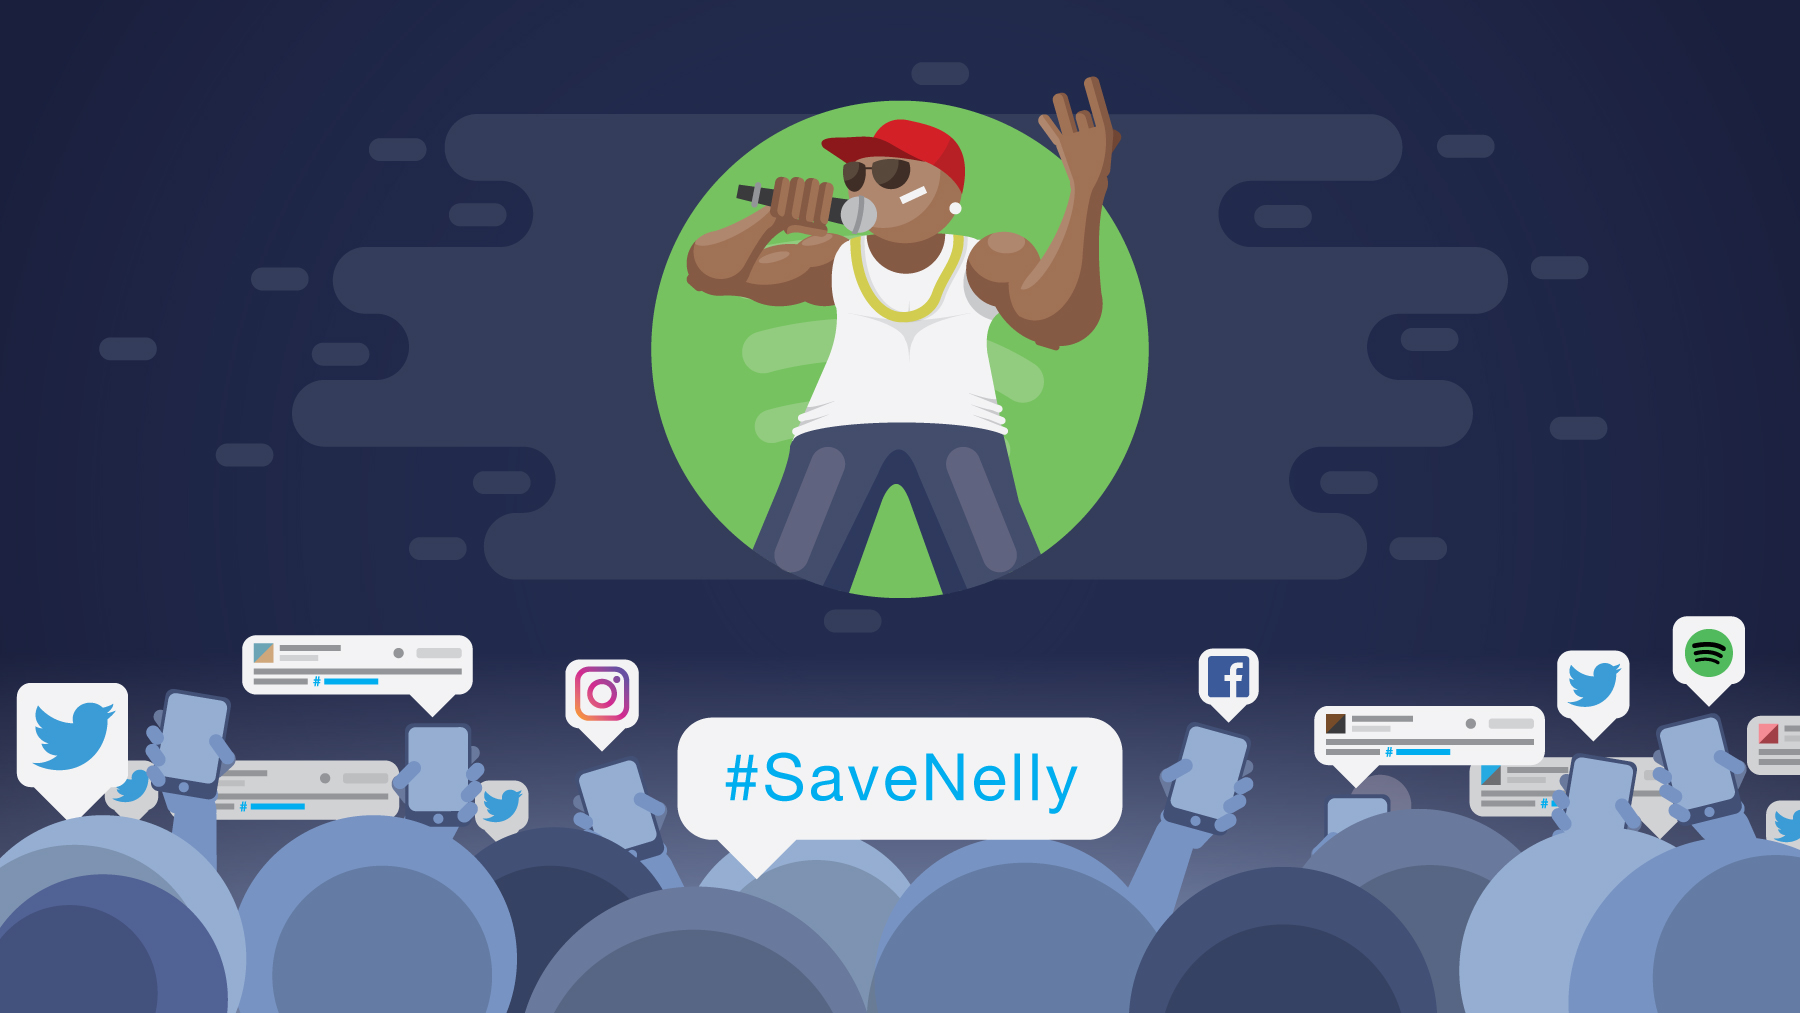 Save Nelly